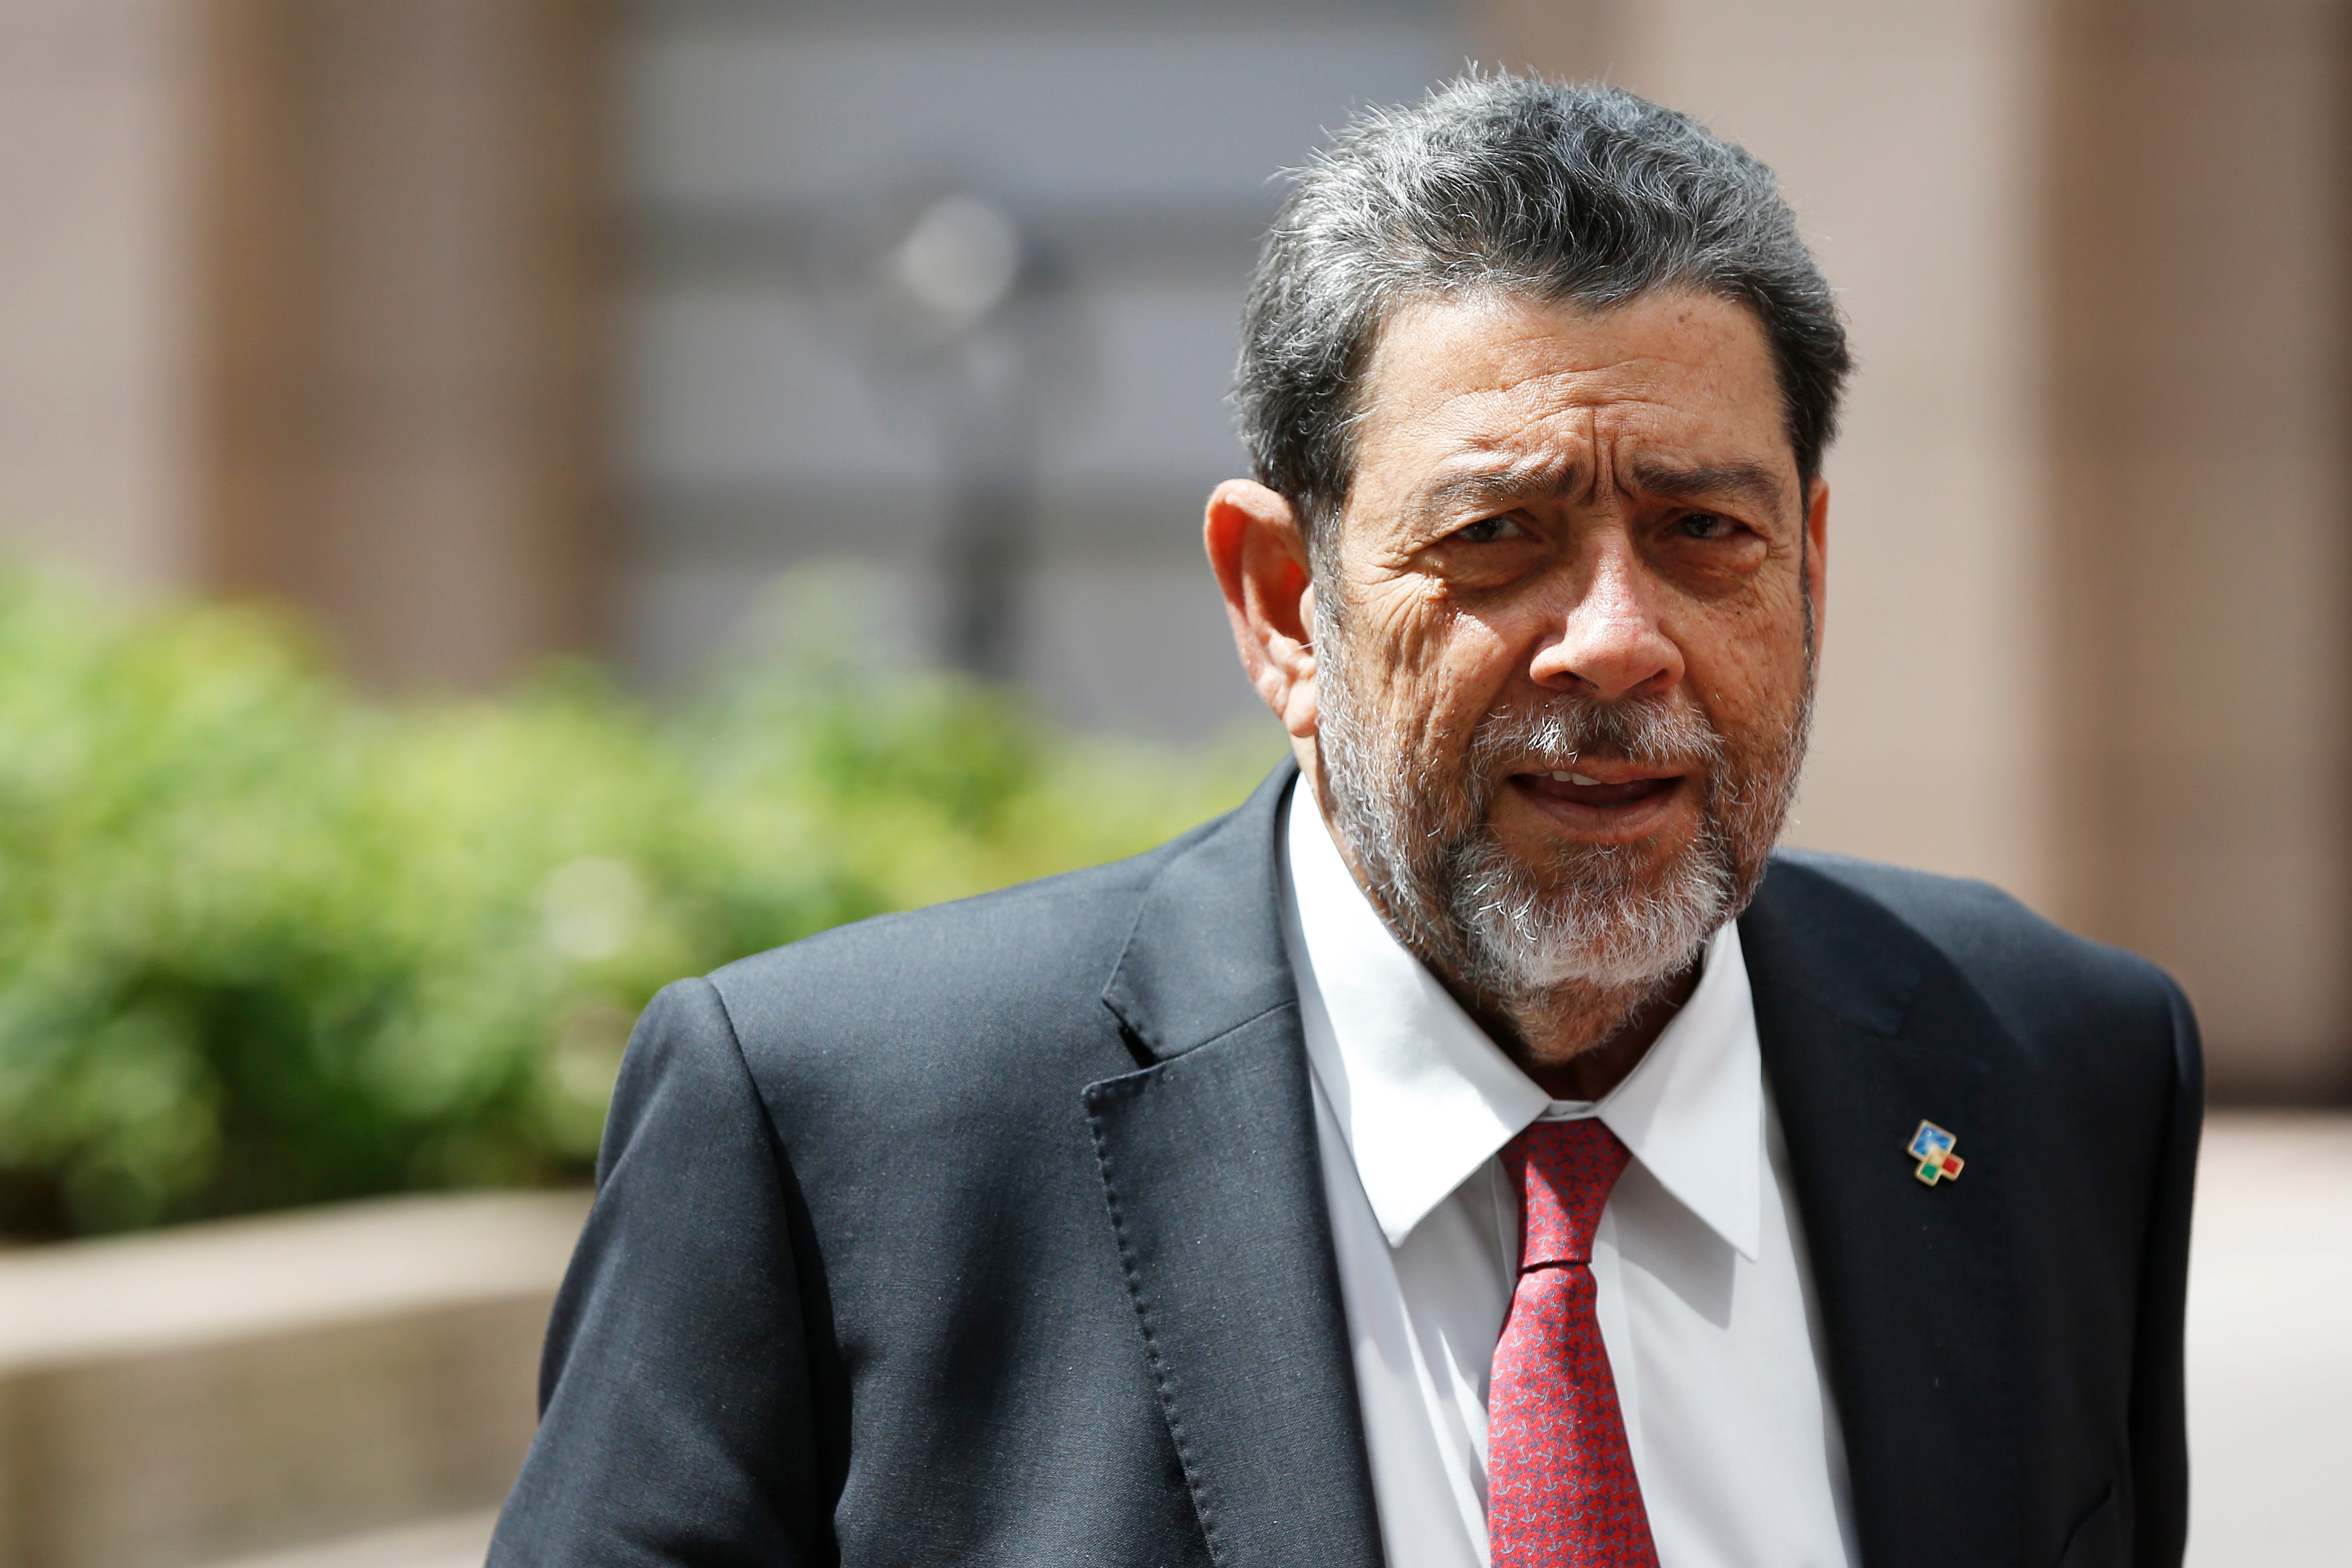 File photo: Saint Vincent and the Grenadines’ Prime Minister Ralph Gonsalves walking in Brussels, Belgium, in June 2015